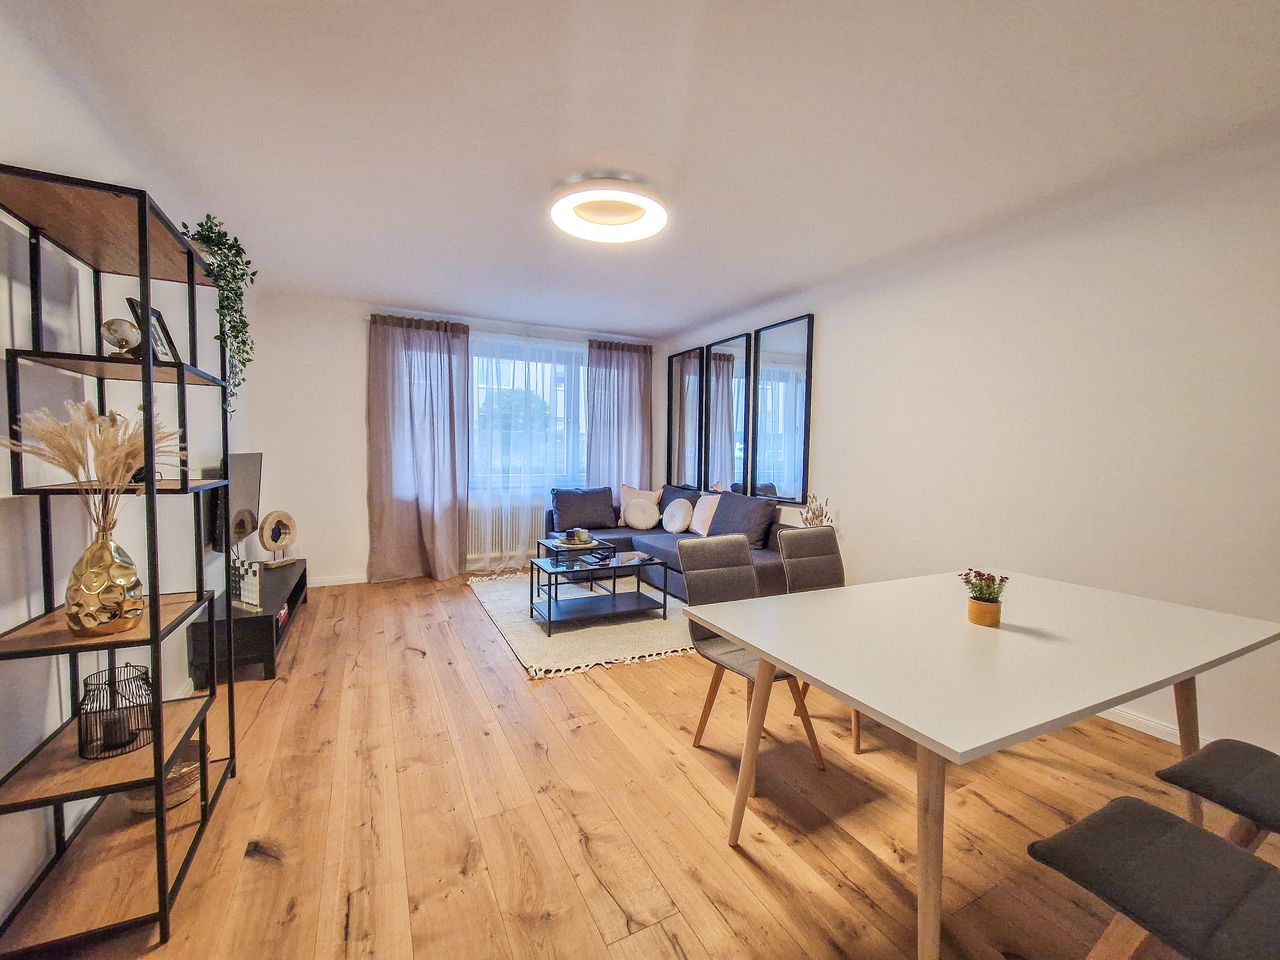 "Exclusive 3-bedroom apartment for business travelers in excellent location - Flotowgasse 18, 1190 Vienna"